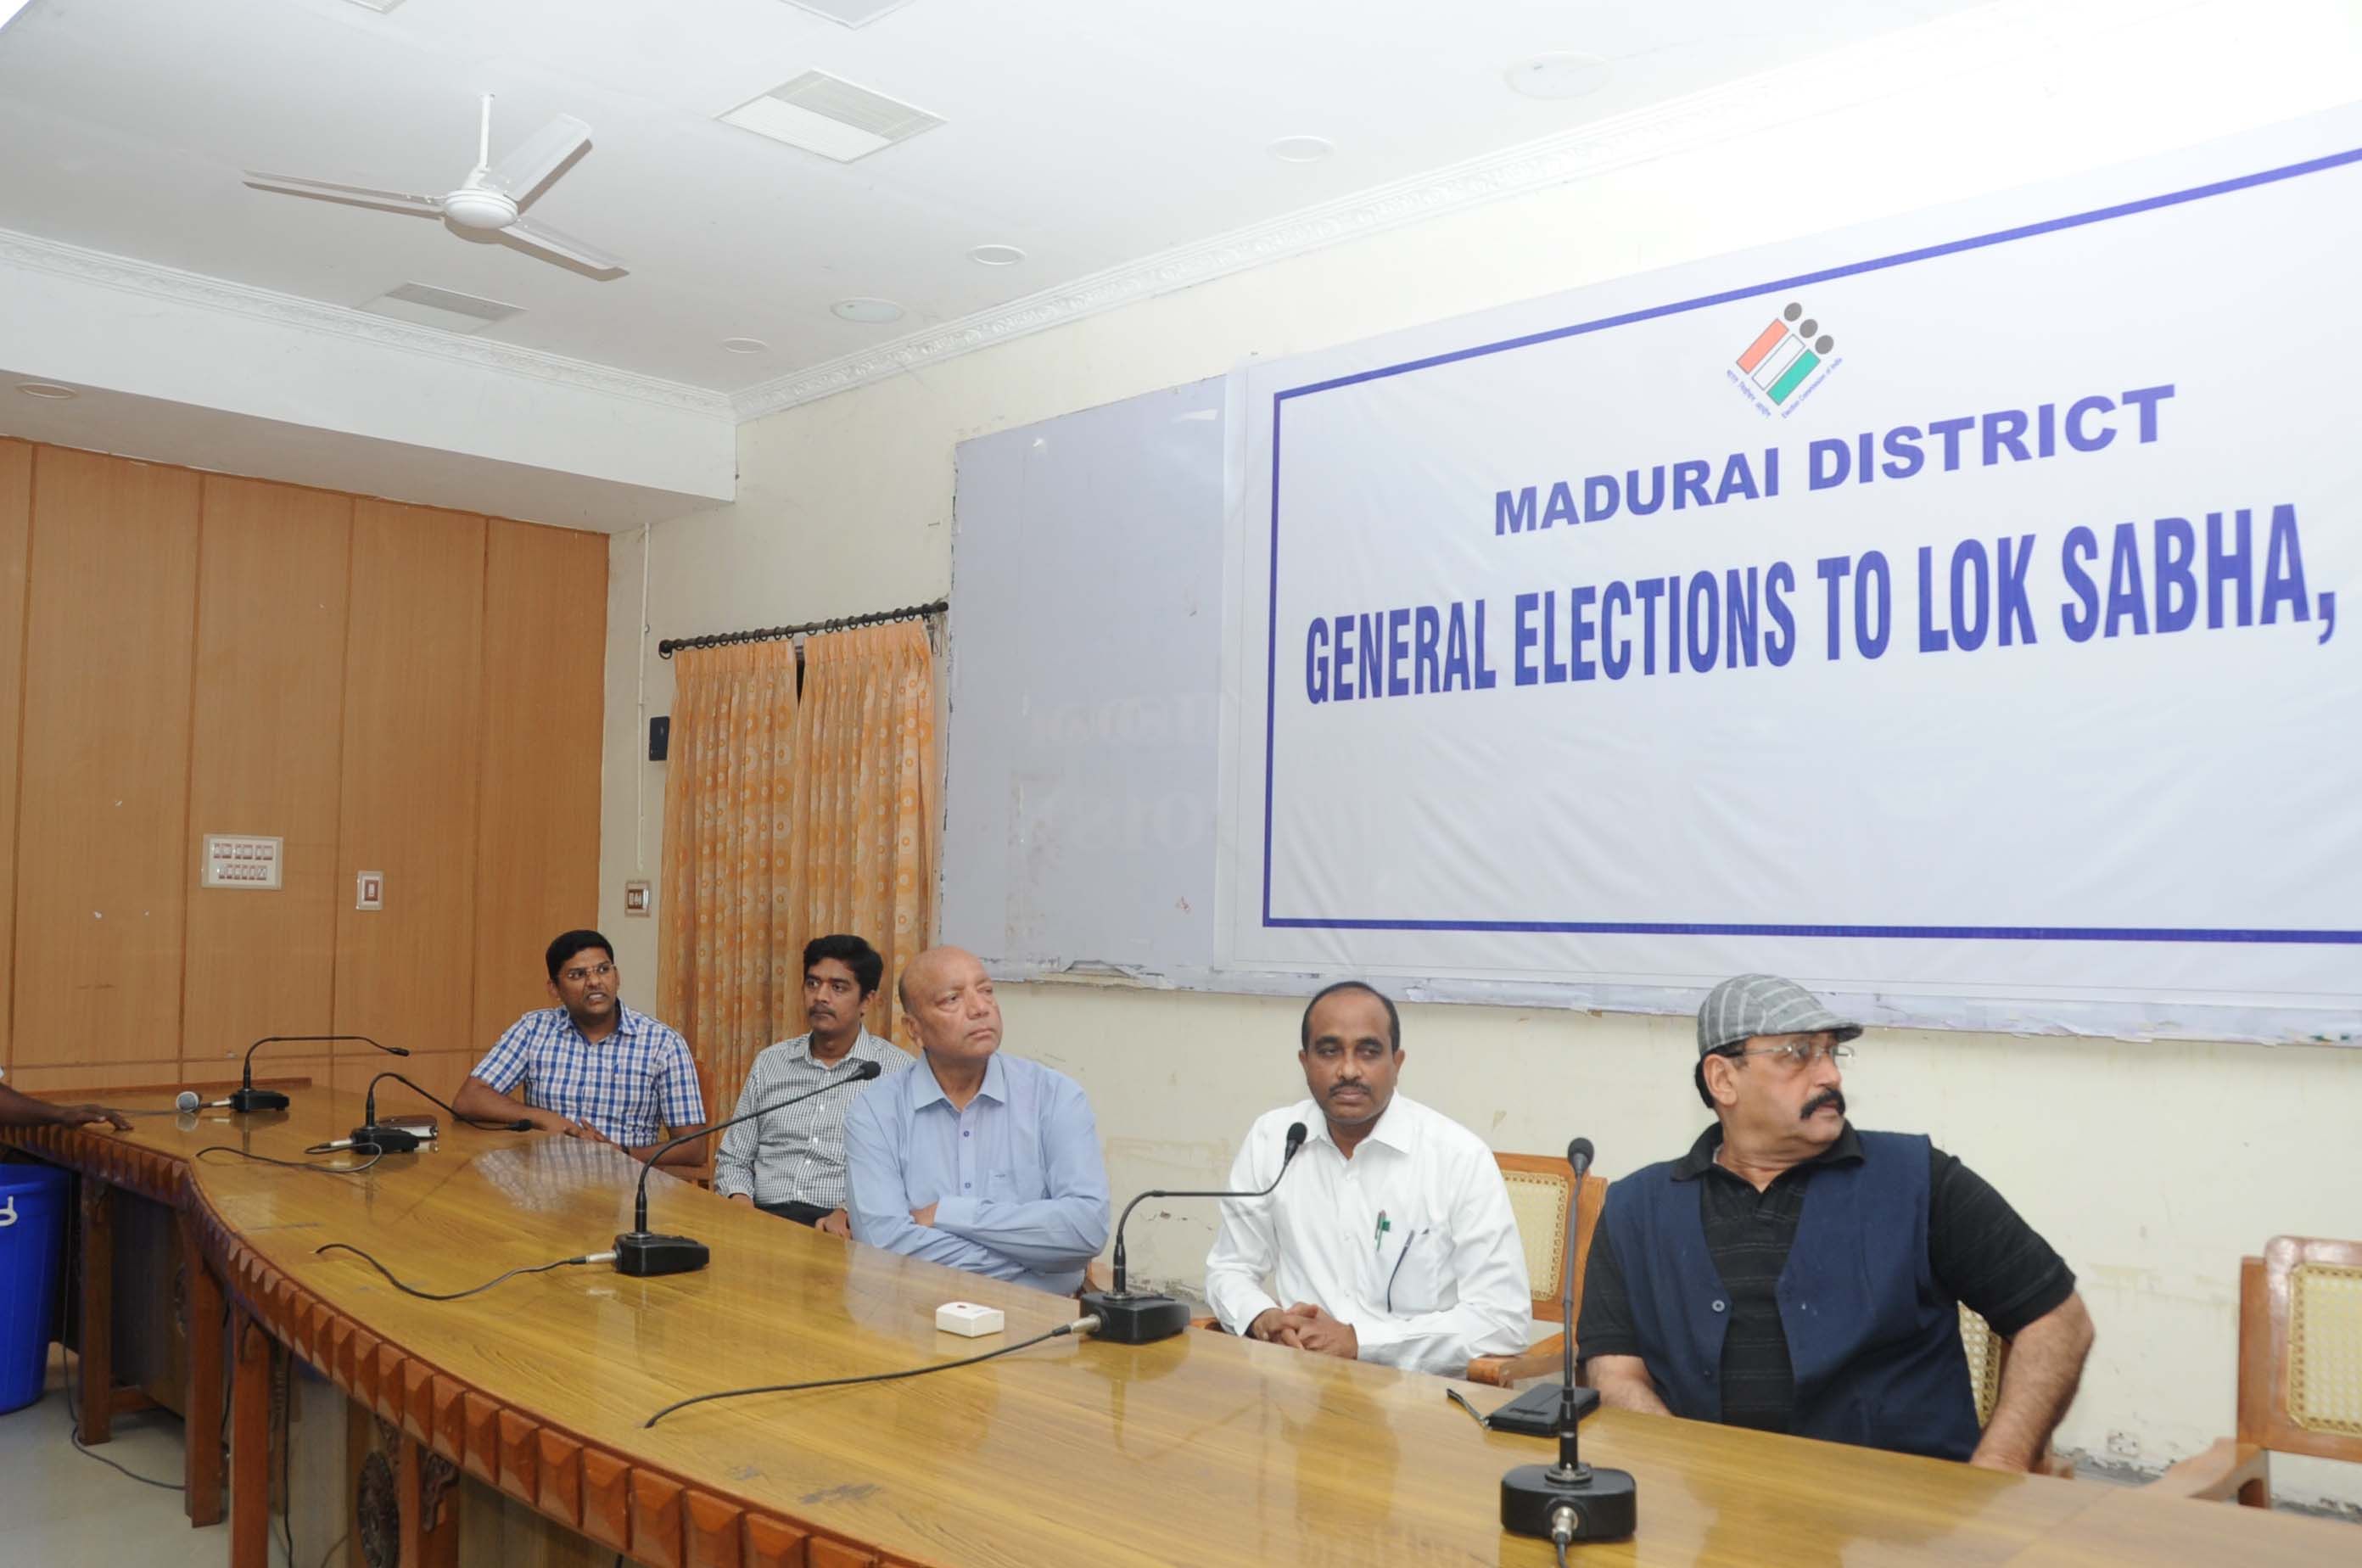 Randomization of EVM-VVPAT machines in presence of madurai parliamentary general observer,District collector/Returning officer and political parties on Madurai north-collectorate campus at 05.04.2019